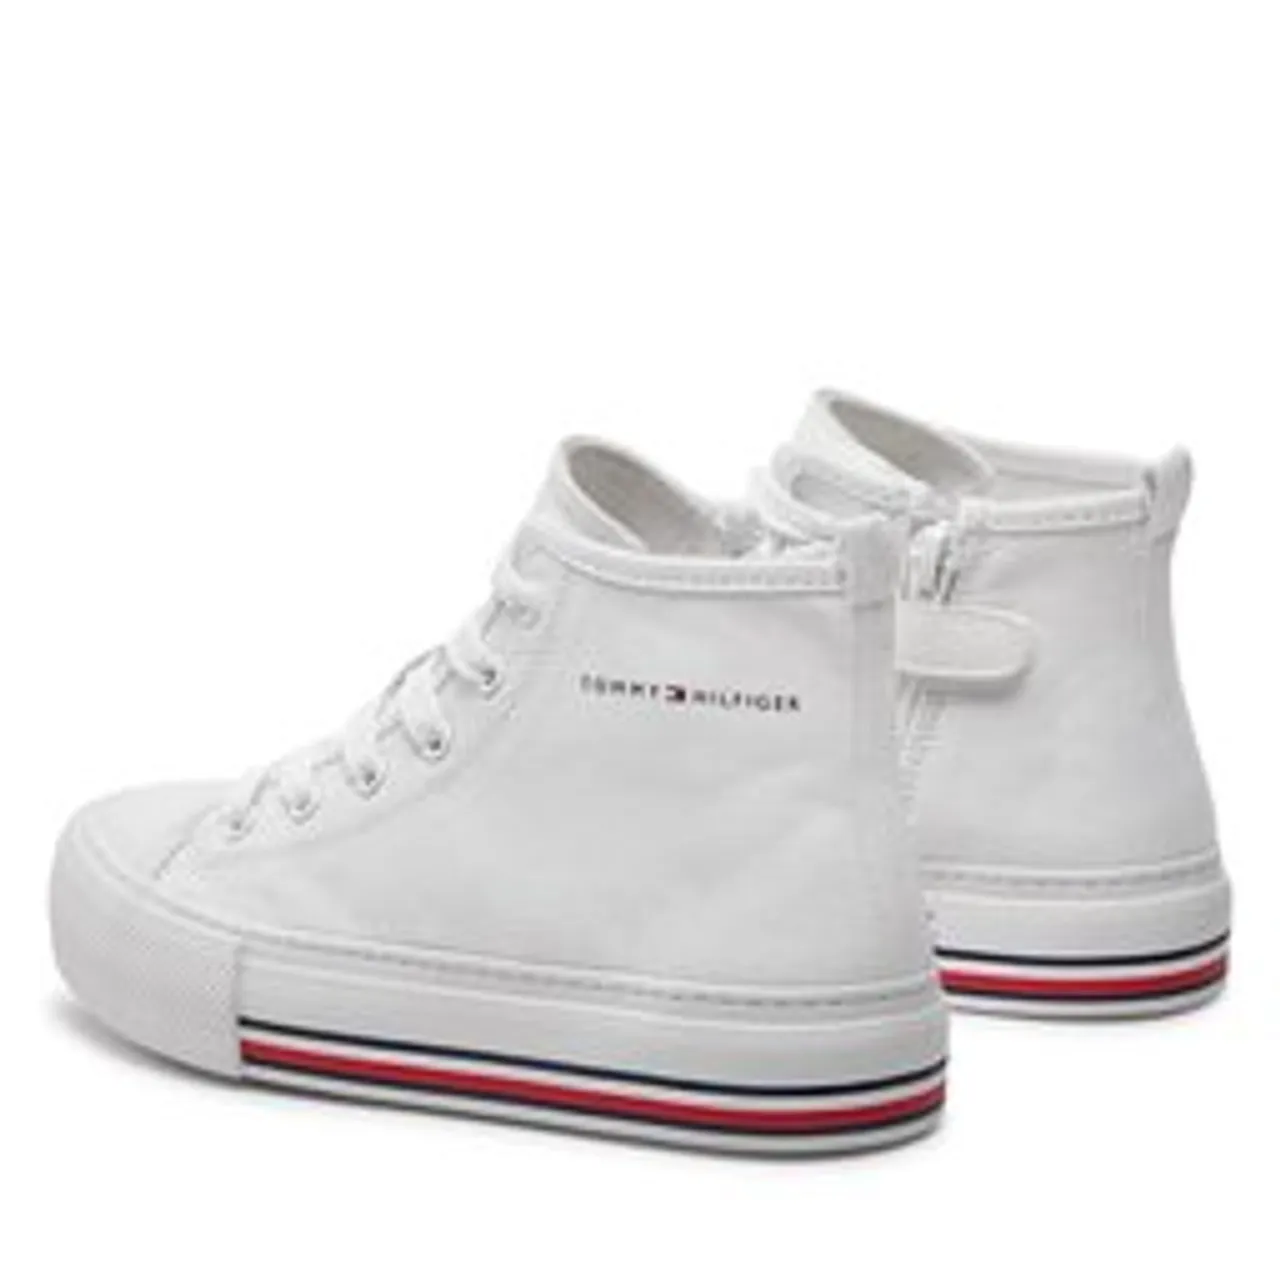 Sneakers aus Stoff Tommy Hilfiger High Top Lace-Up Sneaker T3A9-33188-1687 M White 100